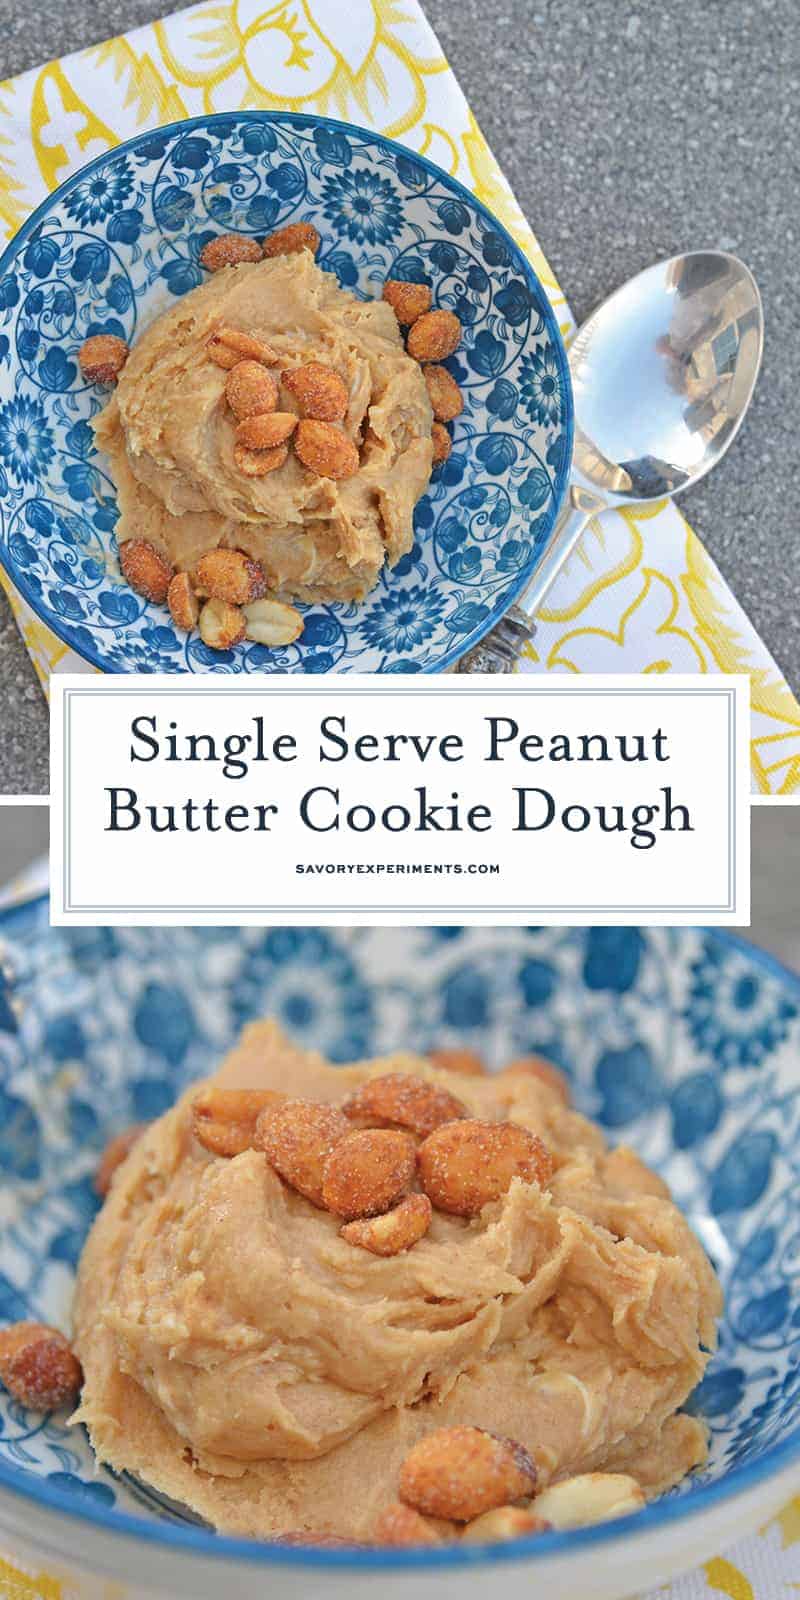 Indulge in small bowl of heaven: eggless single serve Peanut Butter Cookie Dough. You know you want some. #ediblecookiedough #singleservecookiedough #peanutbuttercookiedough www.savoryexperiments.com